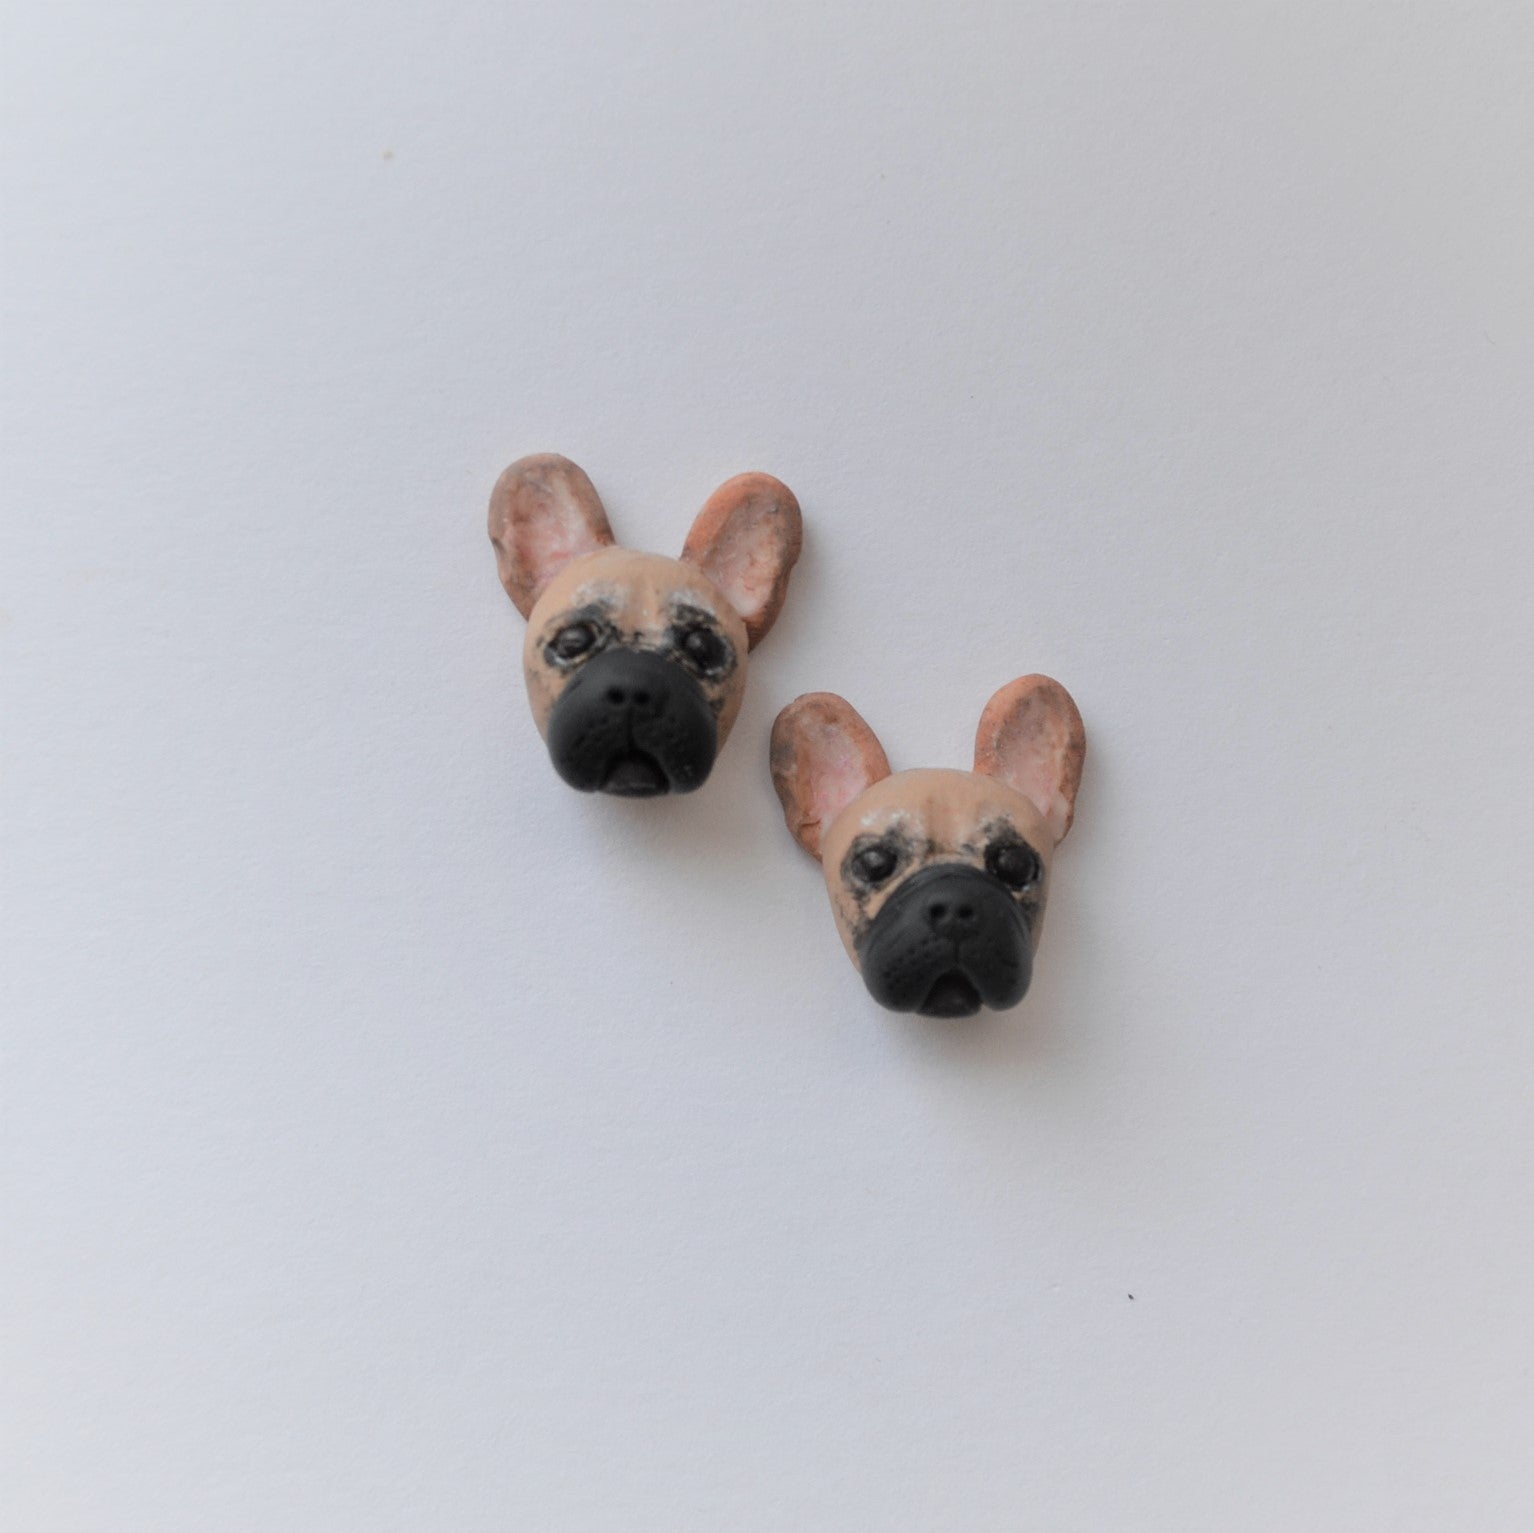 Handmade polymer clay french bulldog stud earrings shown offset on white background